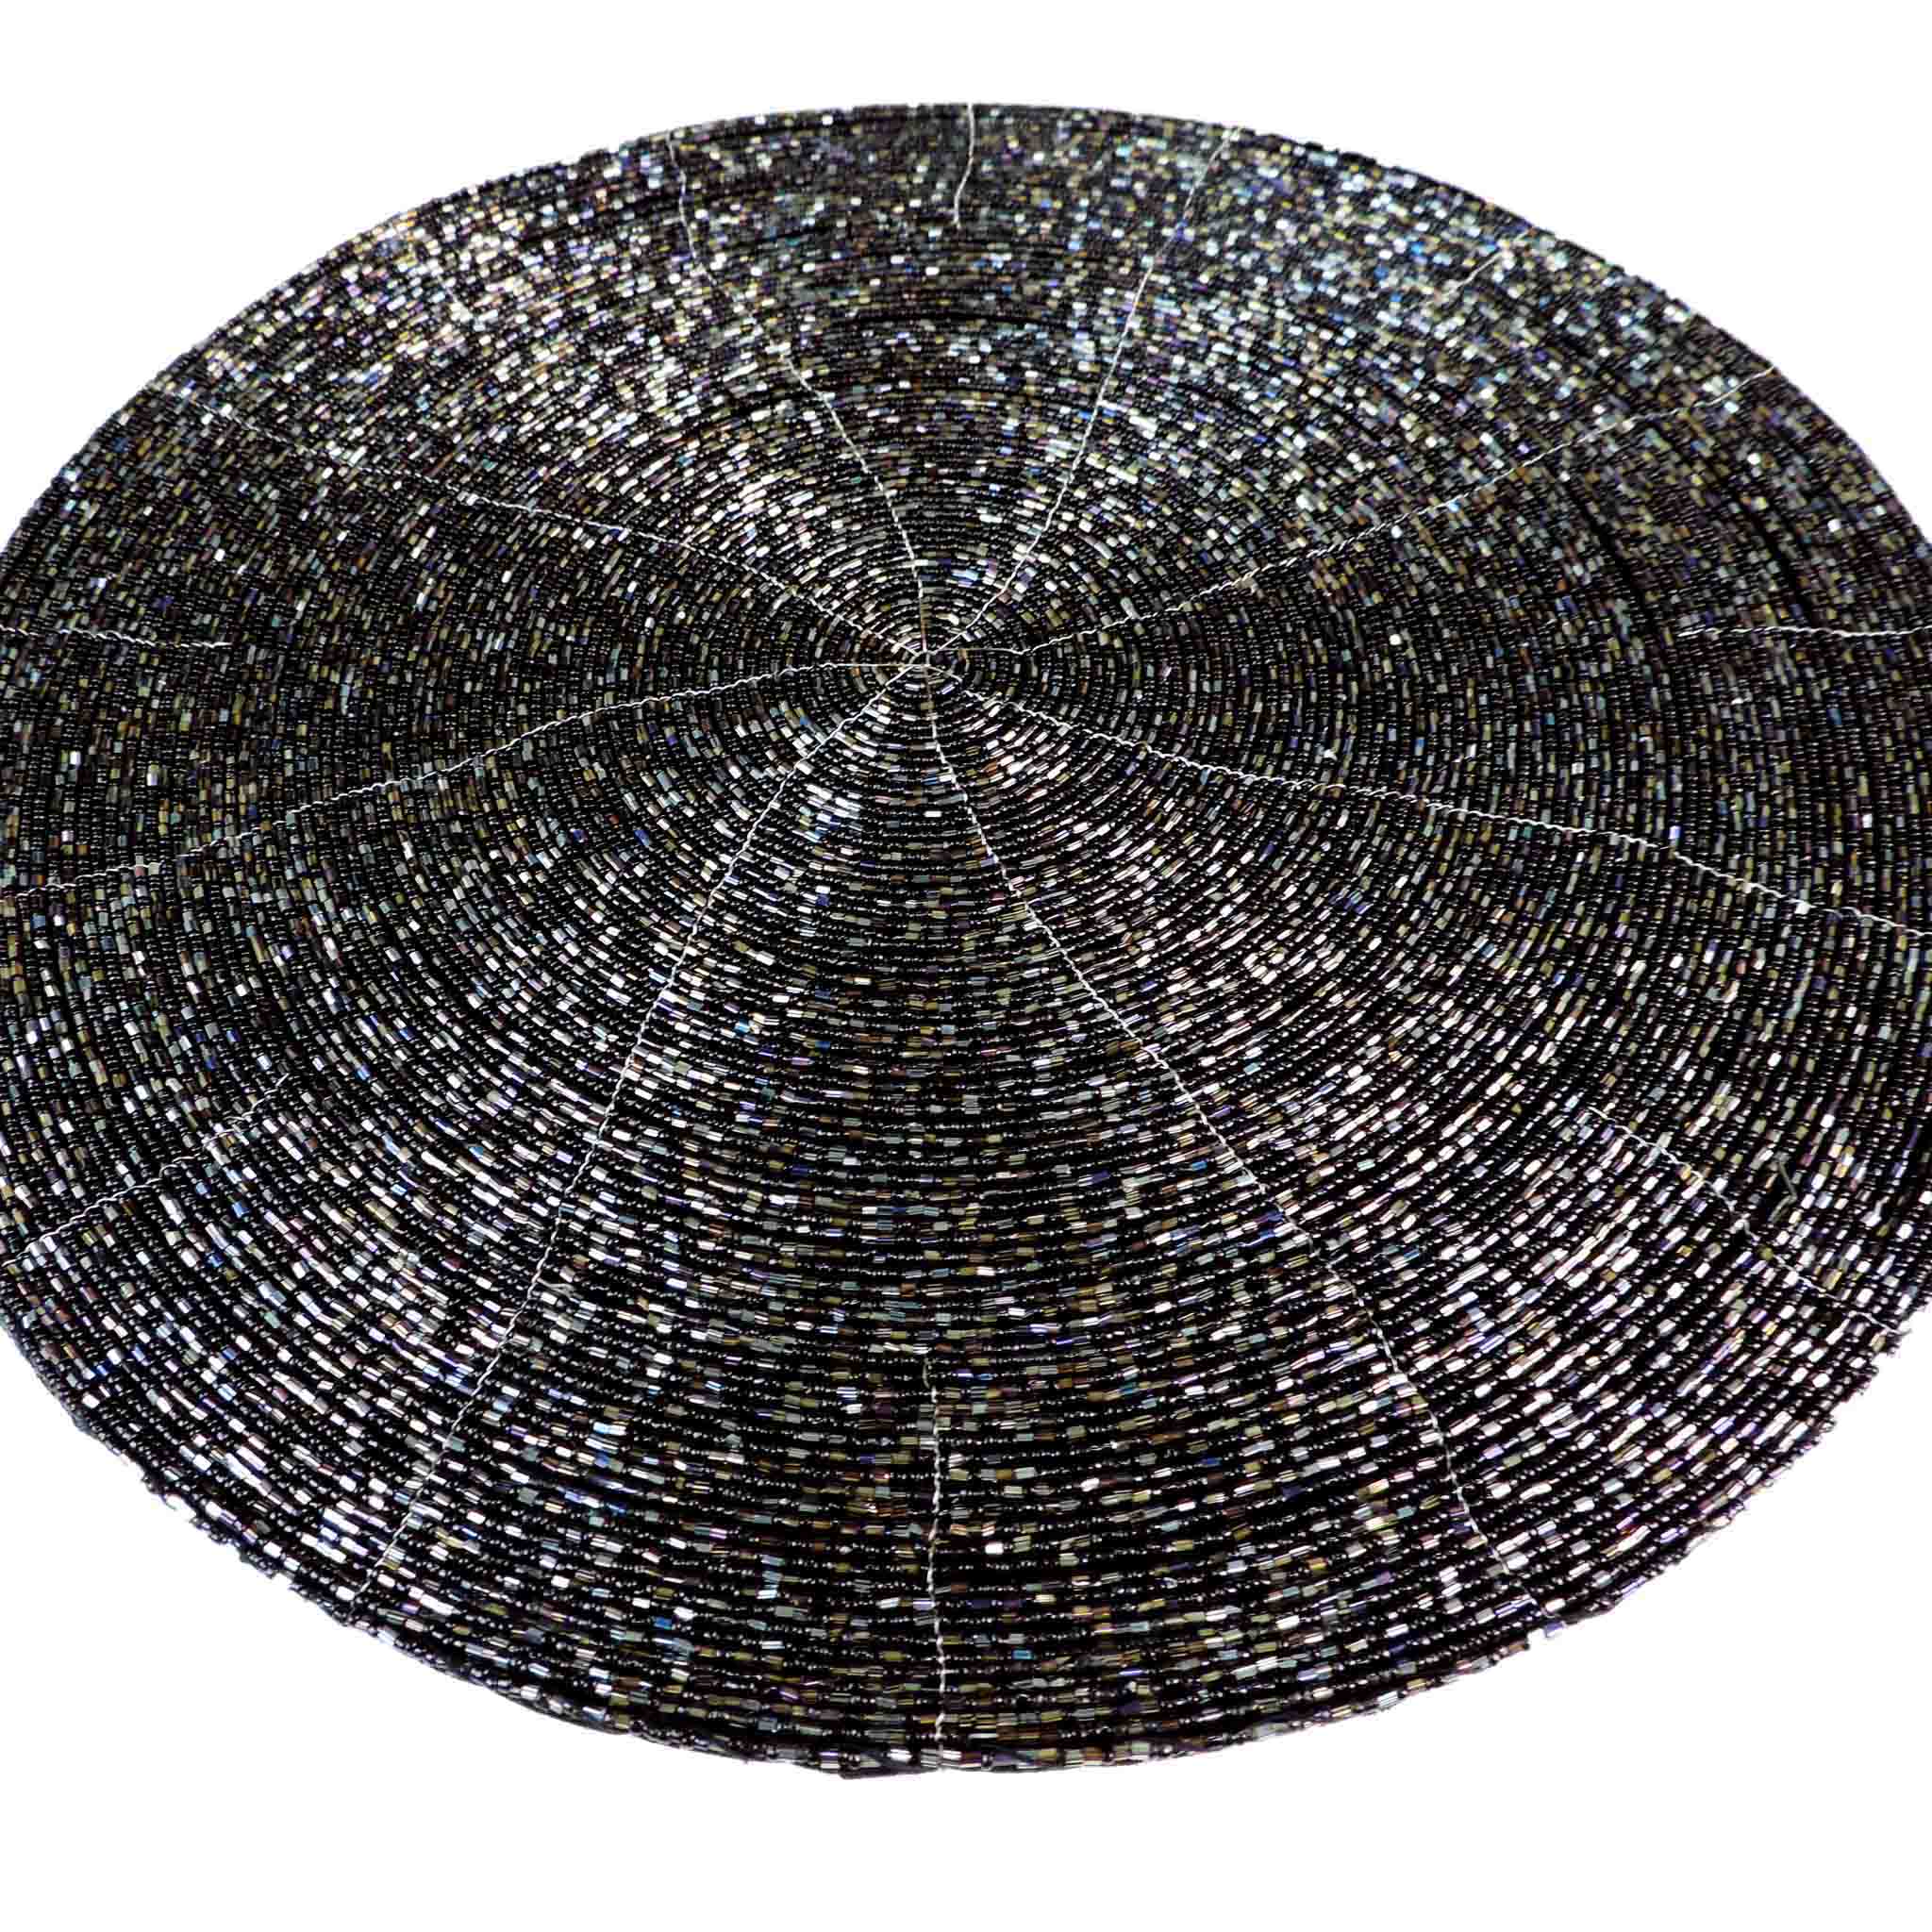 Glass Beaded Placemat in Black & Gold, Set of 4